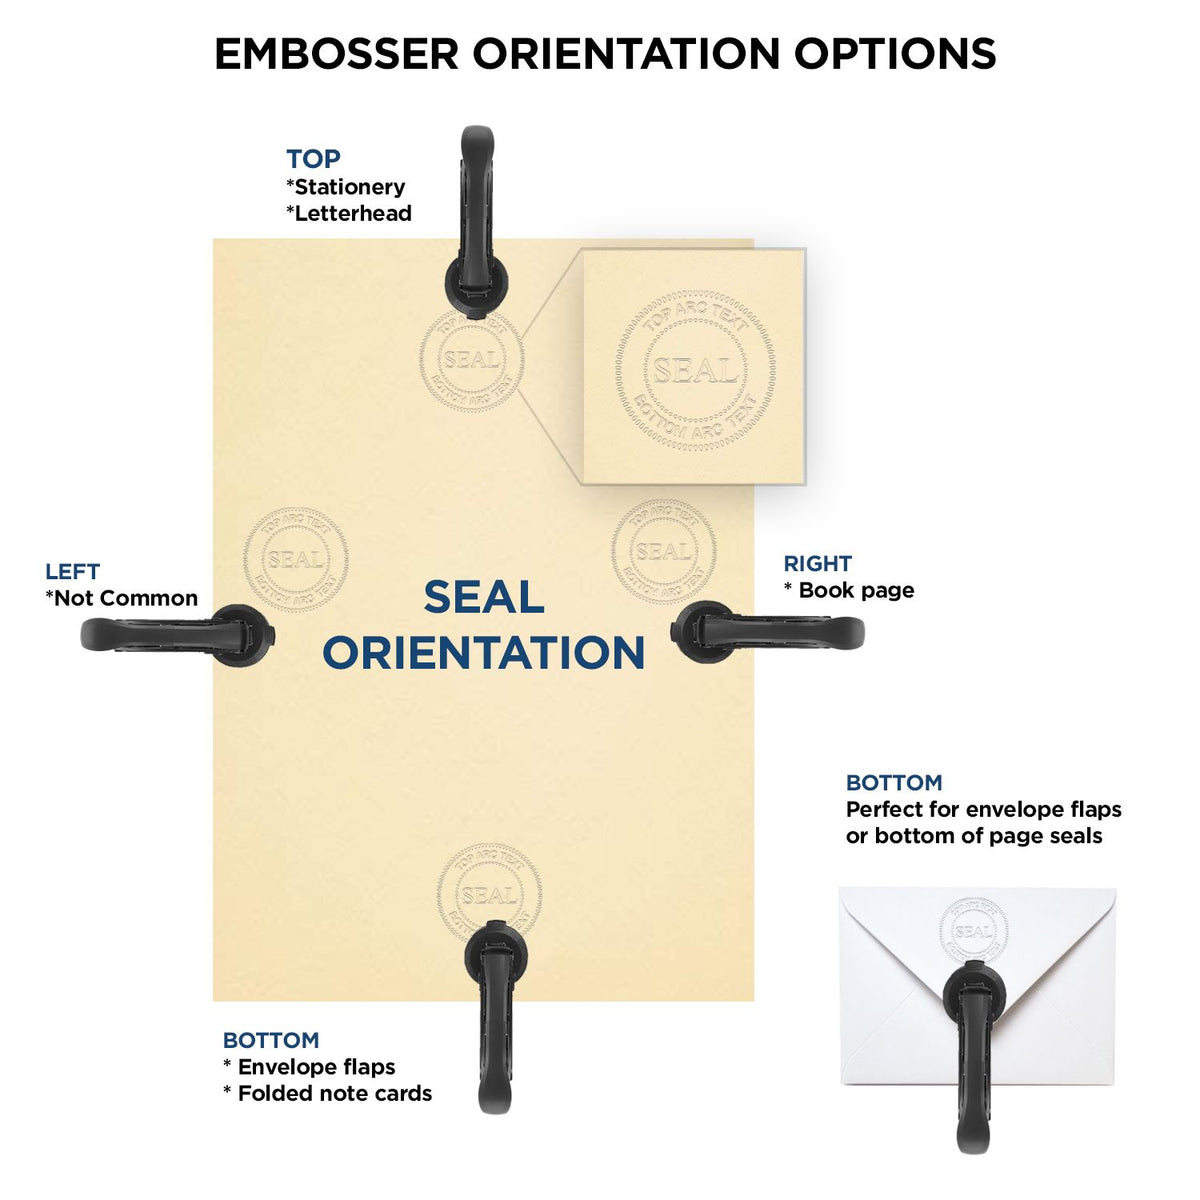 An infographic for the Soft Pocket New Hampshire Landscape Architect Embosser showing embosser orientation, this is showing examples of a top, bottom, right and left insert.